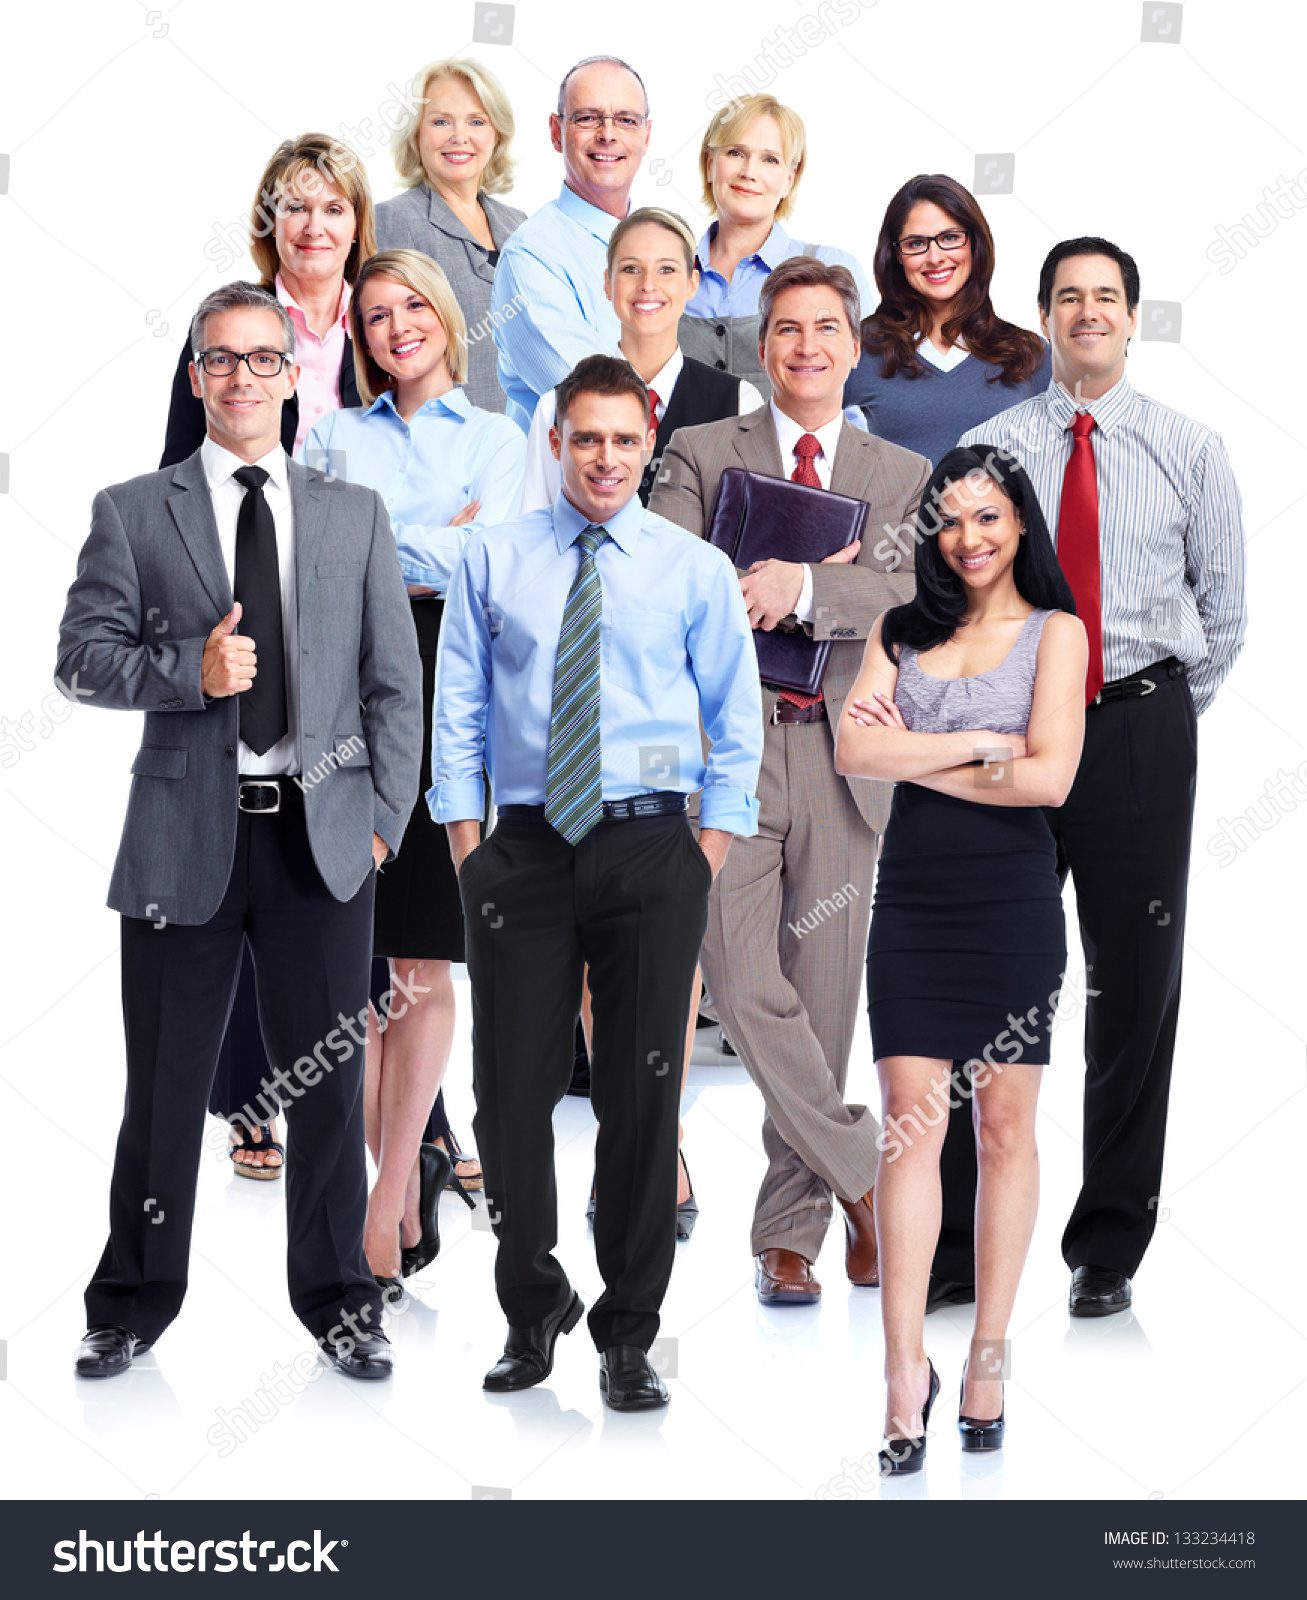 Group of business people. Business team. Isolated over white background. #133234418